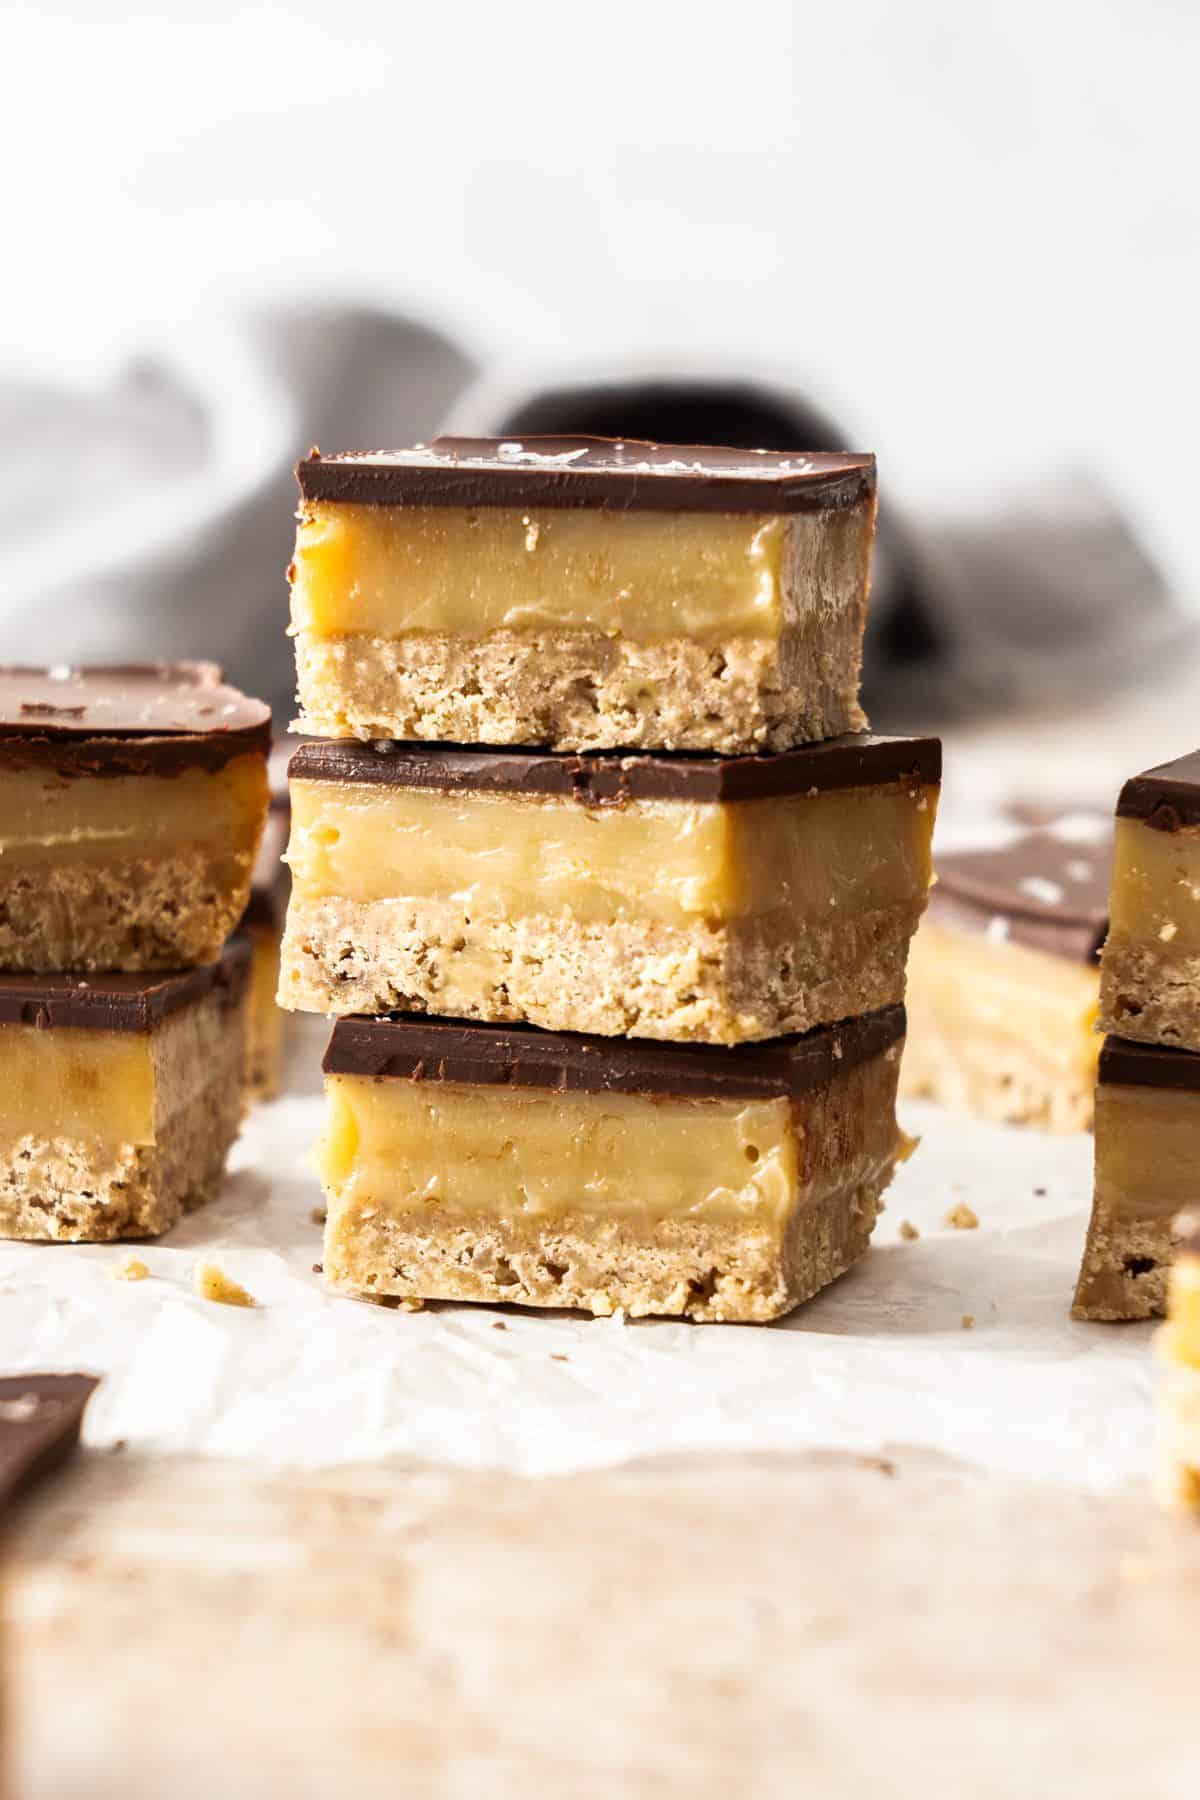 Three pieces of caramel slice stacked on top of each other, with some other pieces on the edge of photo.